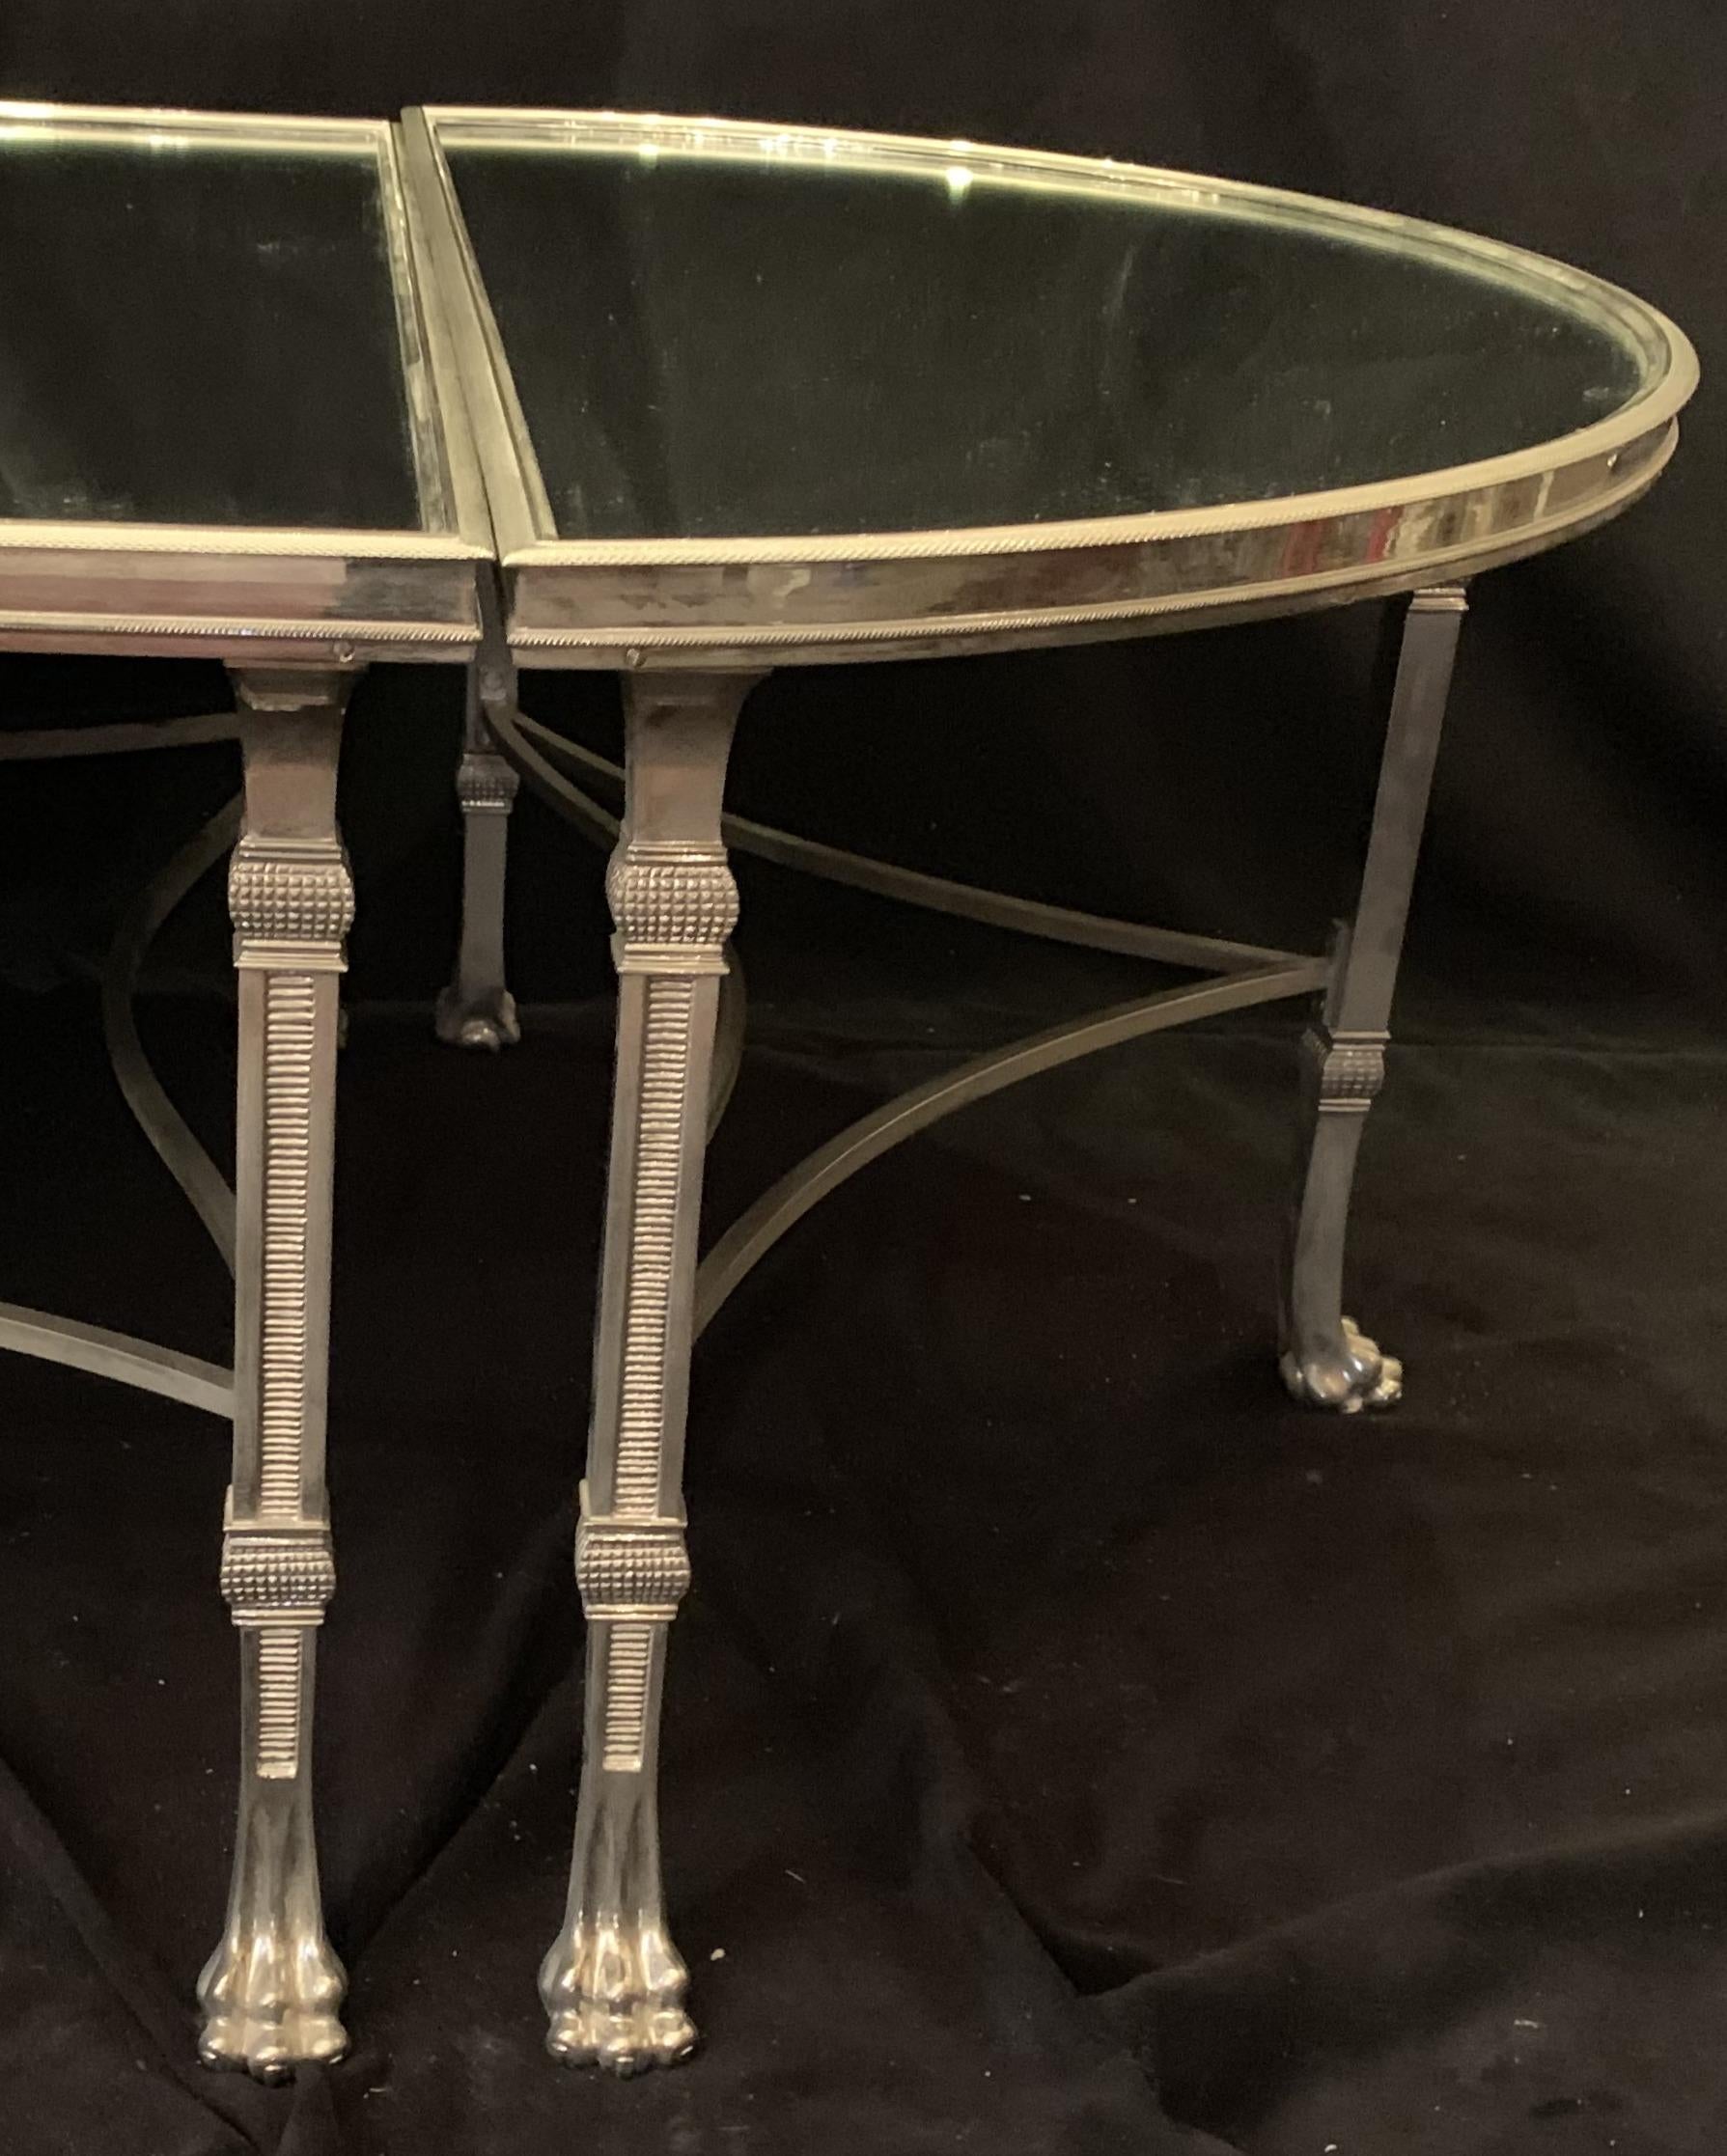 Regency Wonderful French Polished Nickel Bronze Mirror Three Part Cocktail Coffee Table